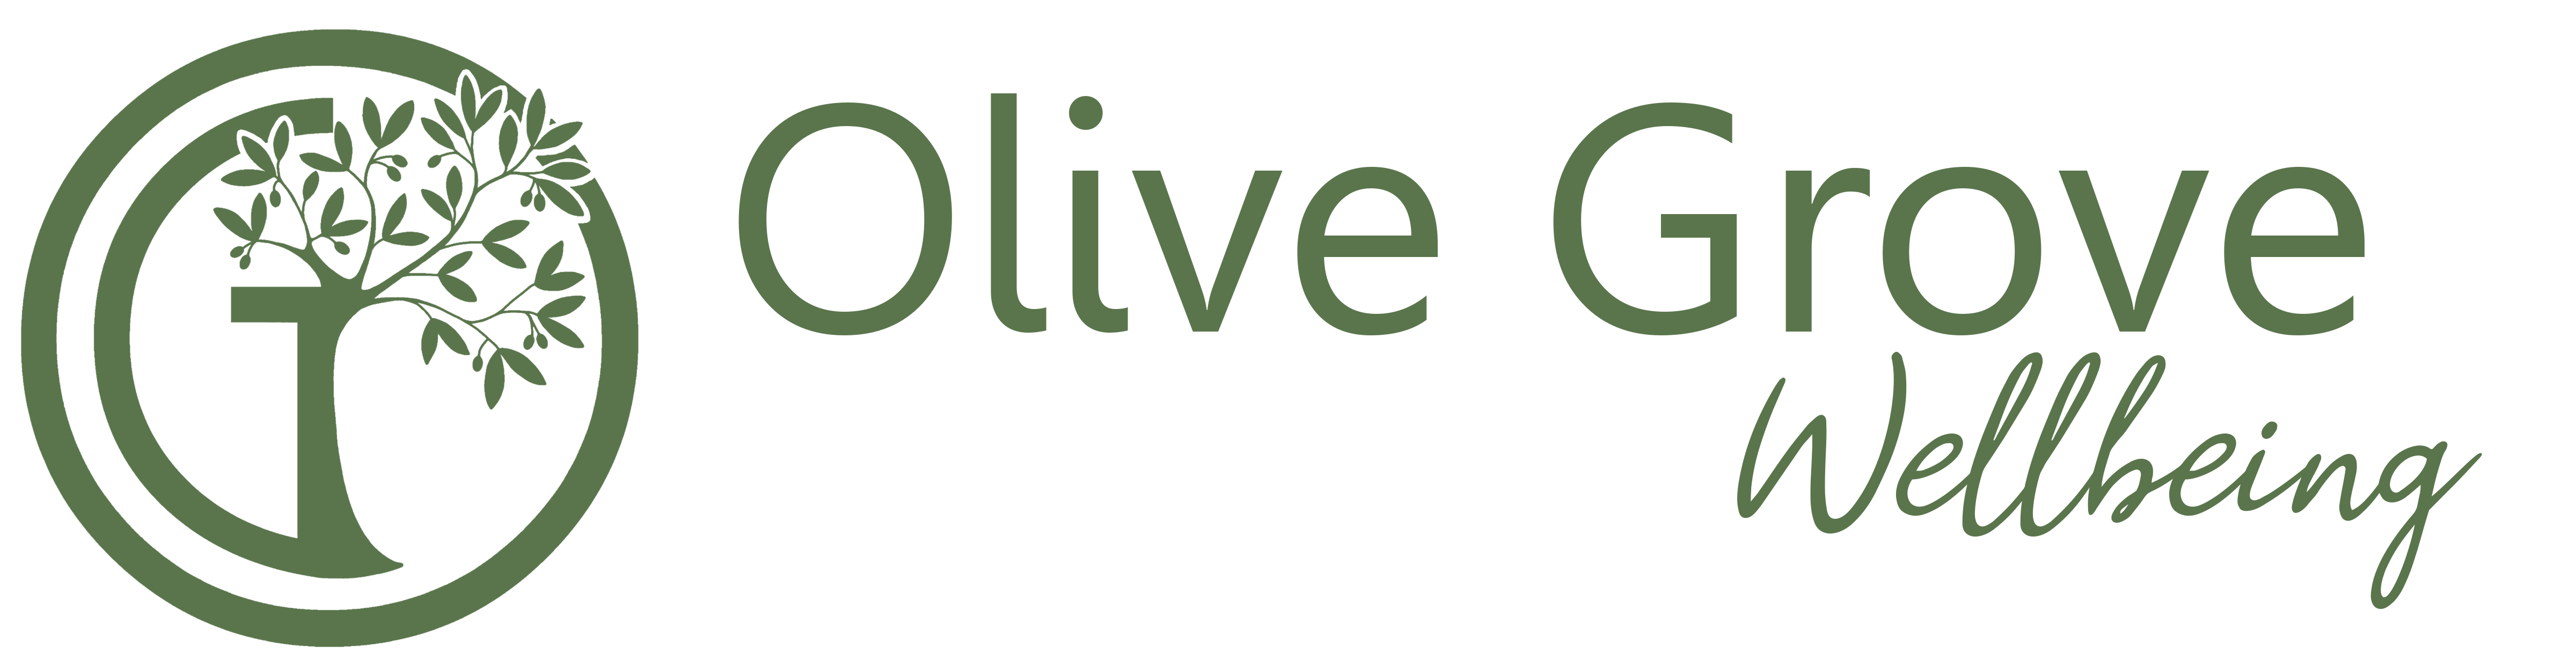 Olive Grove Wellbeing